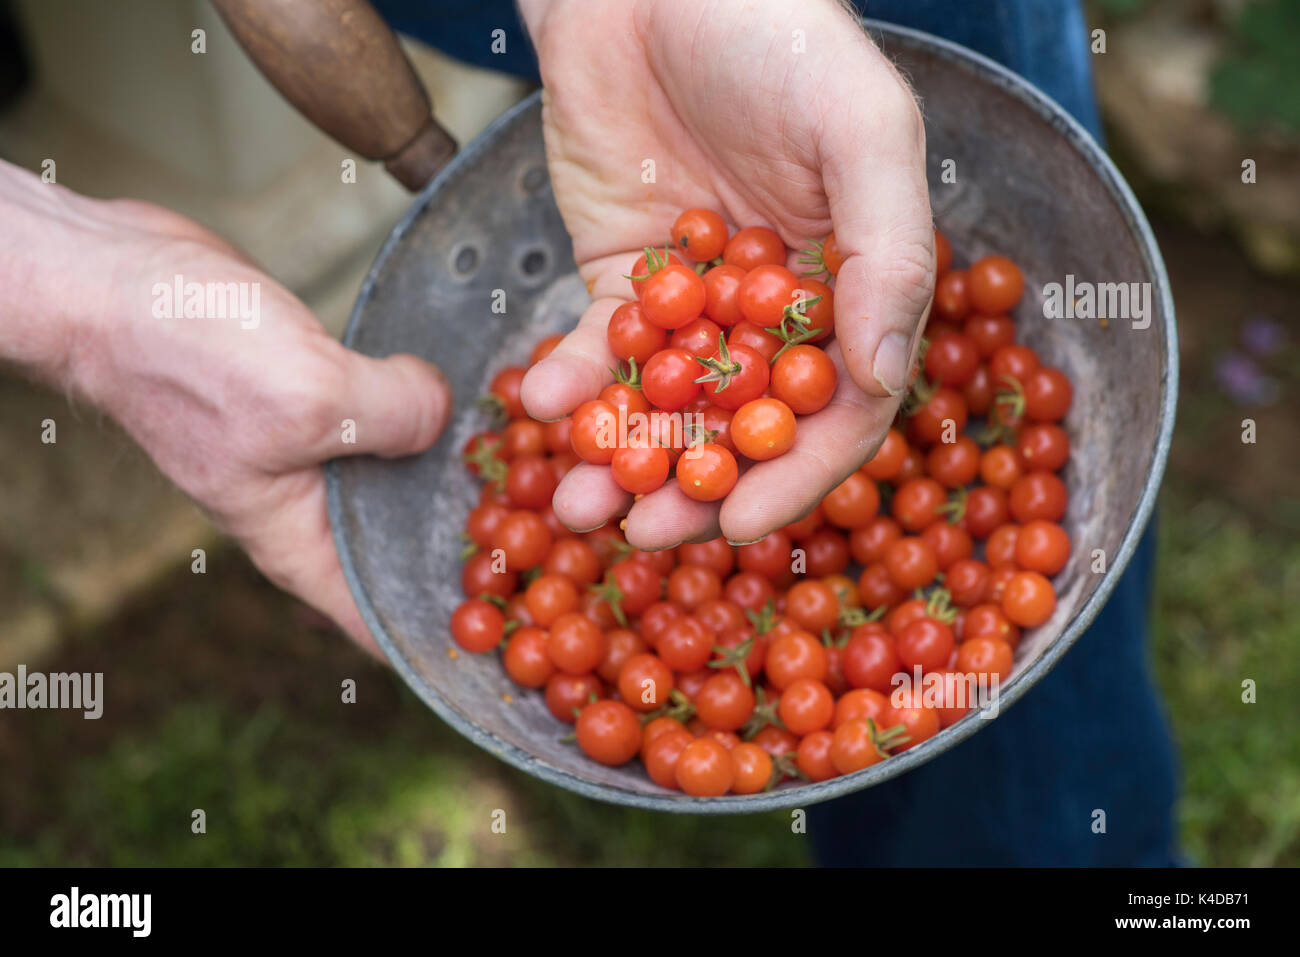 Solanum pimpernelifolium. Gardener holding an old metal pan with harvested Currant tomatoes. Heirloom tomato. Wild Tomato Stock Photo